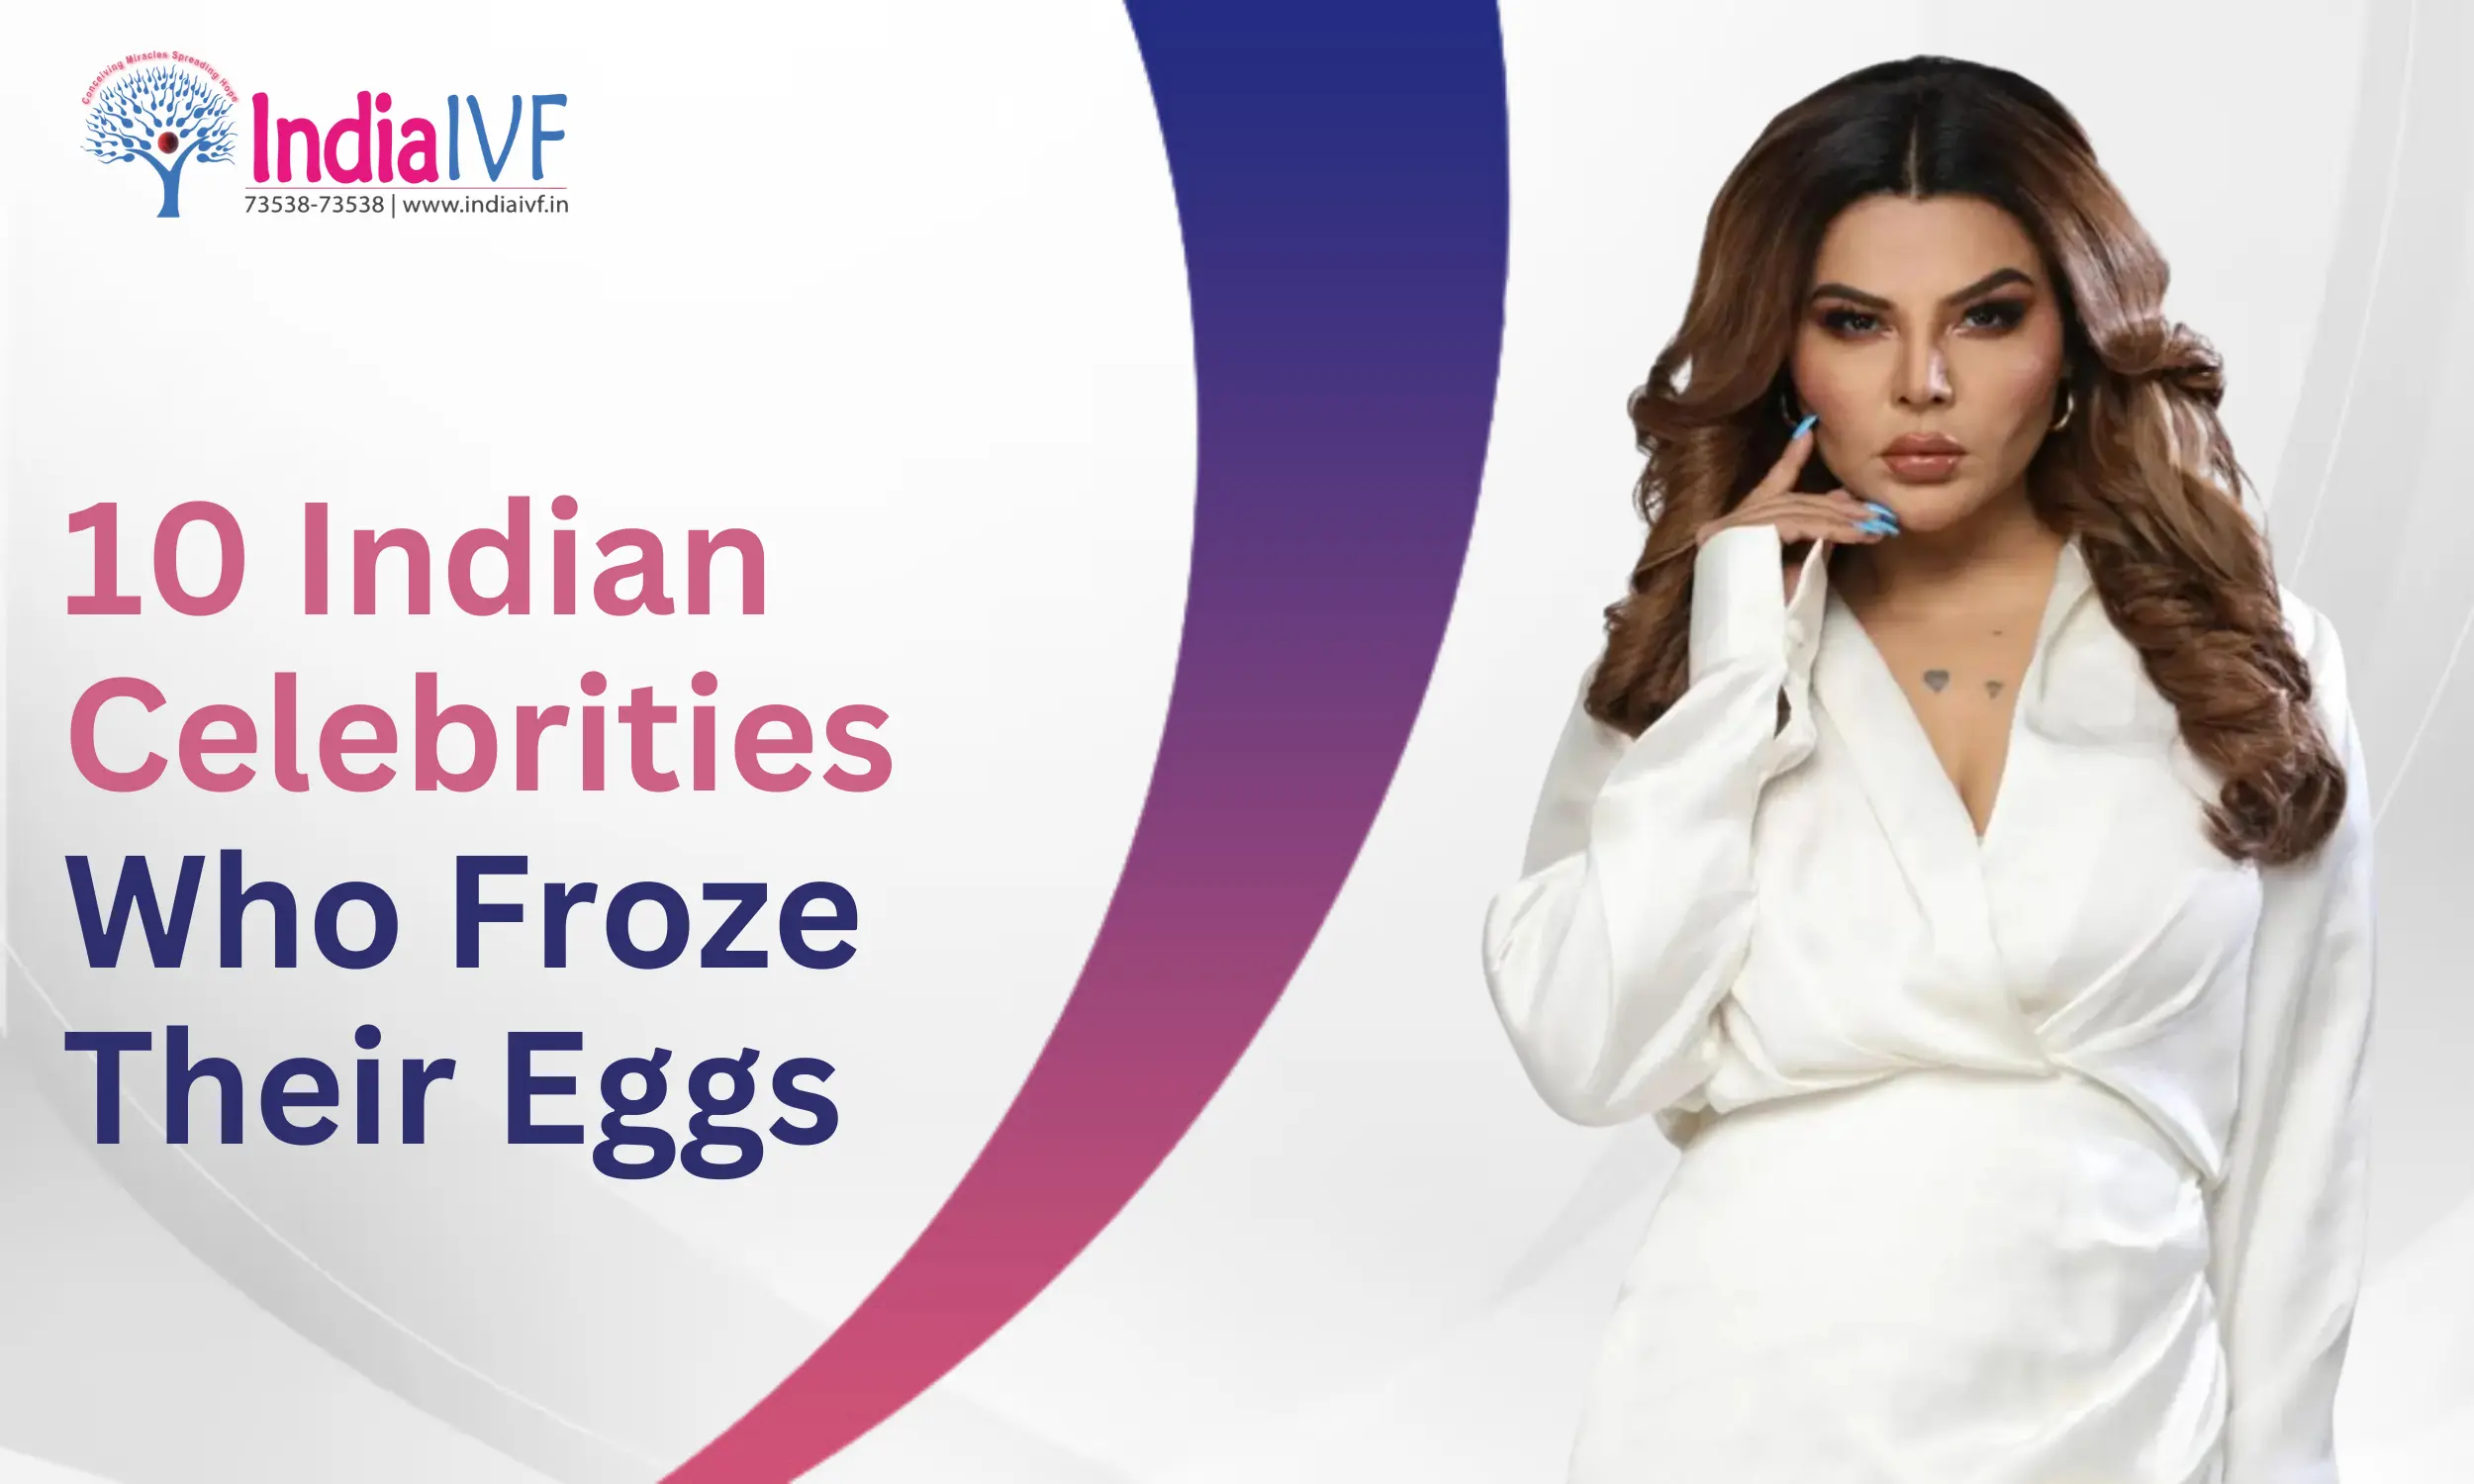 10 Indian Celebrities Who Froze Their Eggs